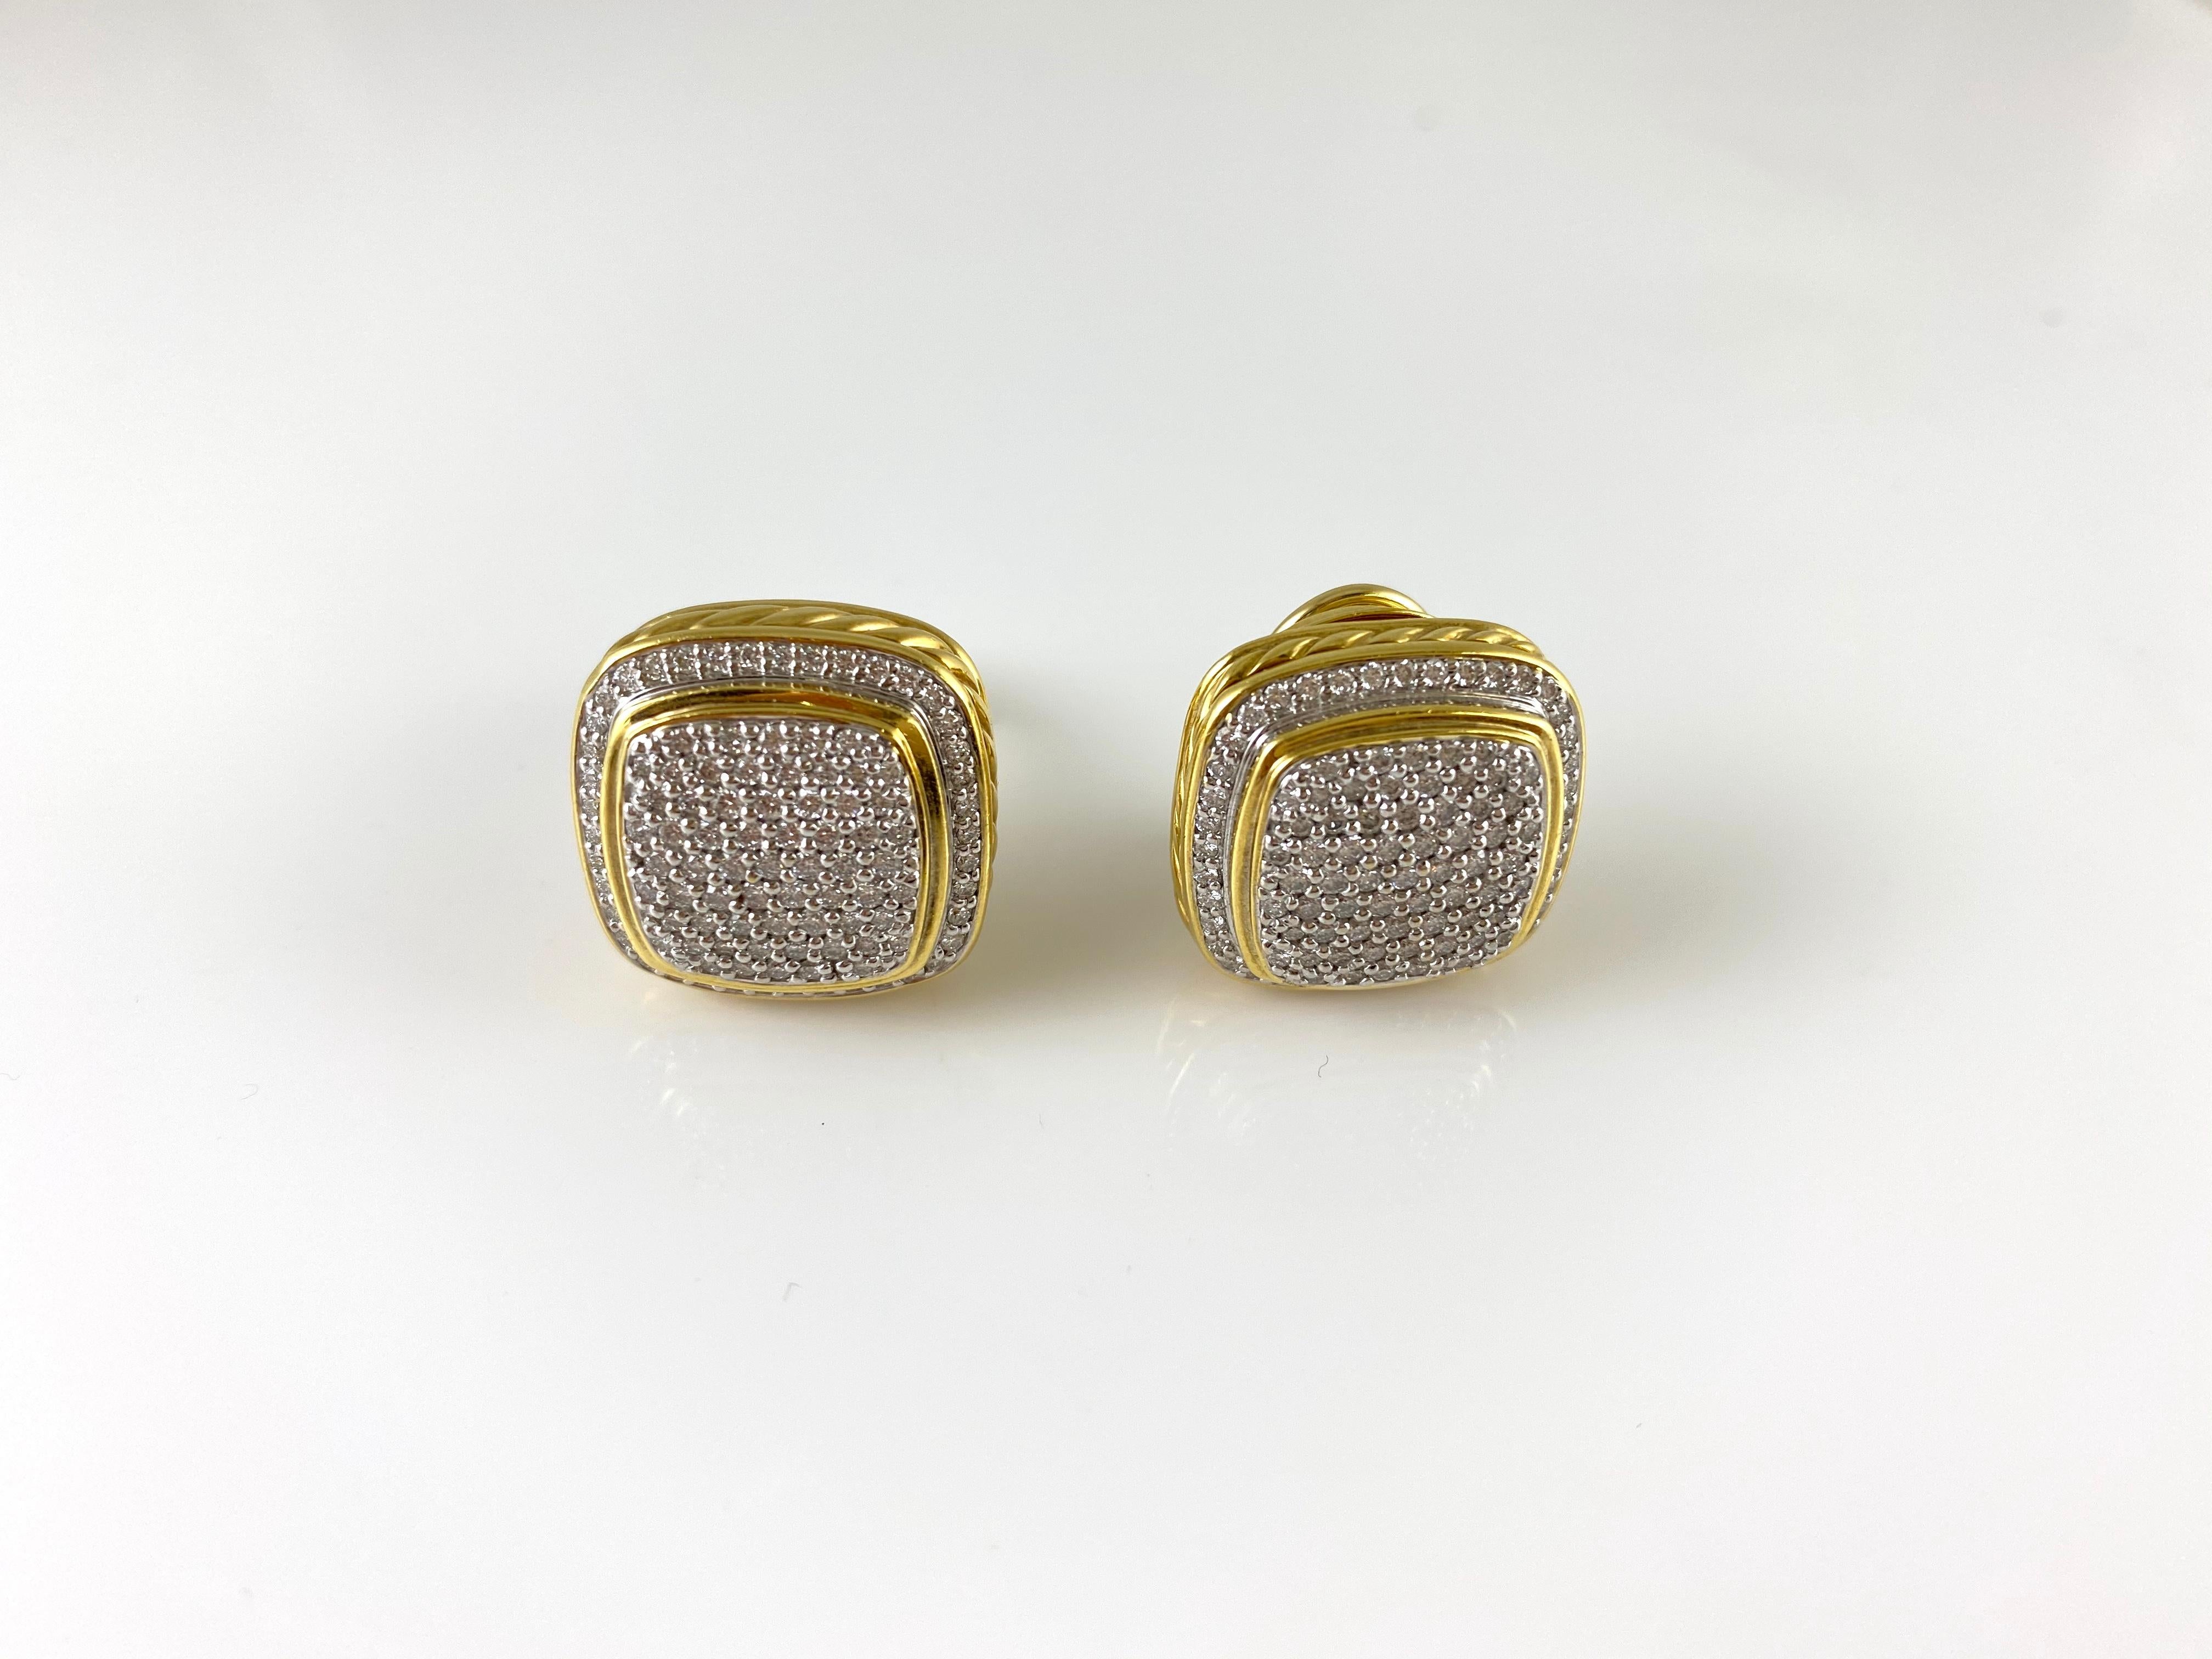 The earring is finely crated in 18k with diamonds weighing approximately total of 4.40 carat.
Signed by David Yurman.
Circa 2000.